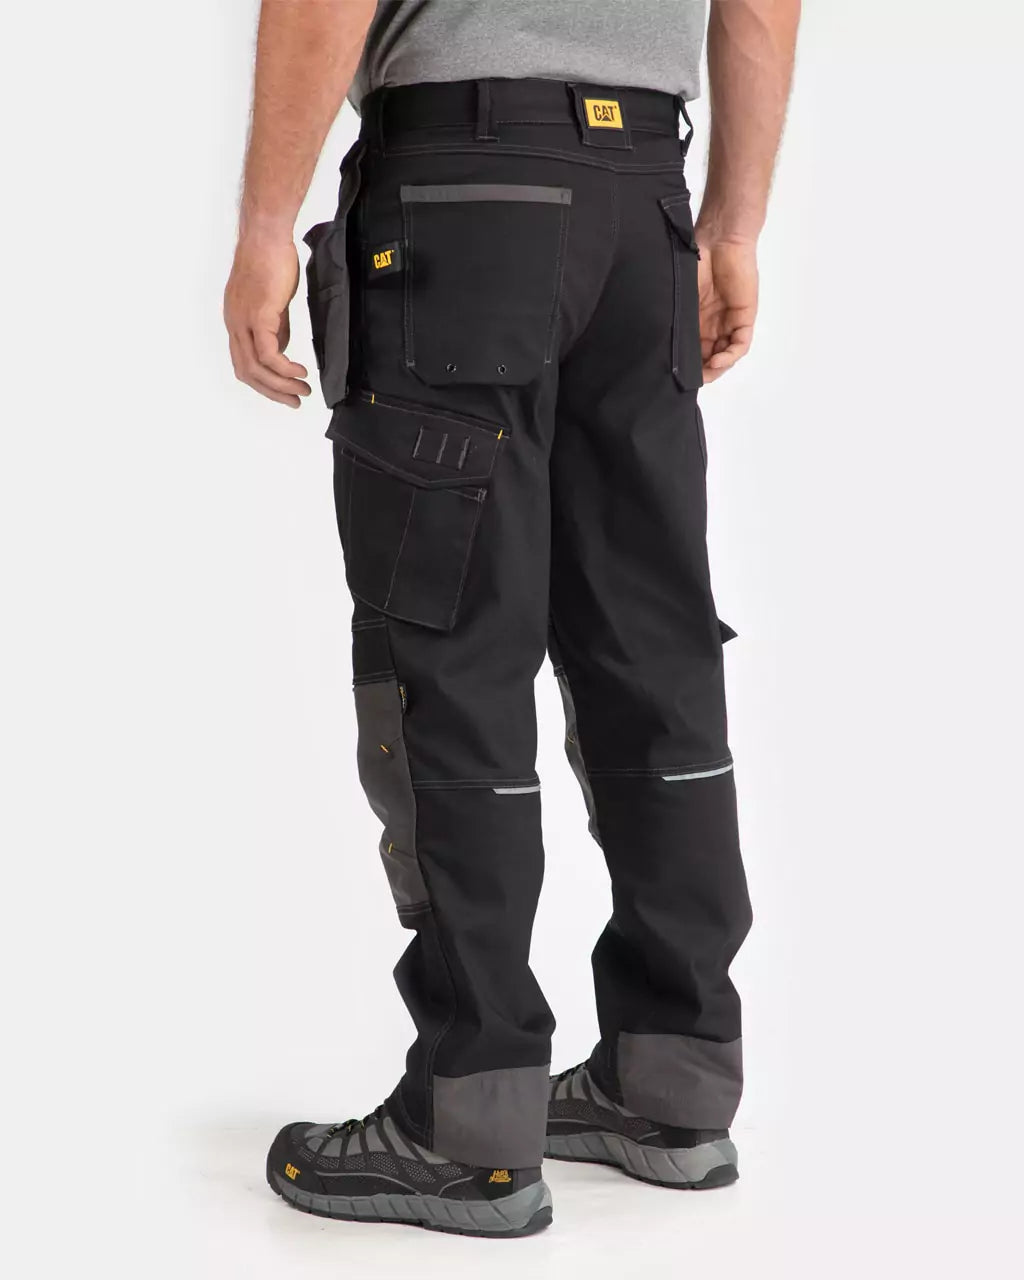 Amazon.com: Caterpillar Men's Trademark Work Pants Built from Tough Canvas  Fabric with Cargo Space, Classic Fit, Black, 28W x 30L: Work Utility Pants:  Clothing, Shoes & Jewelry